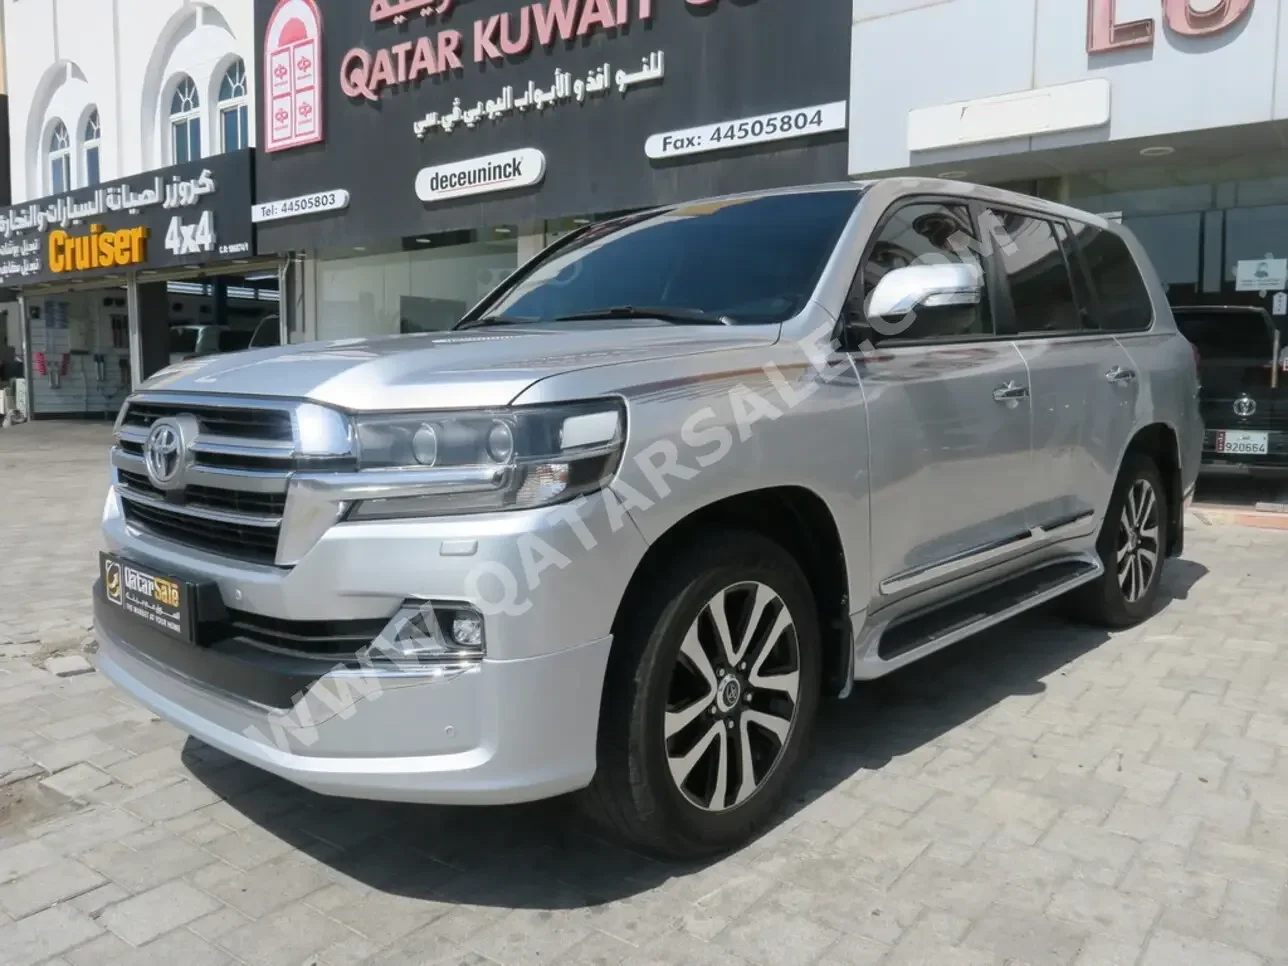 Toyota  Land Cruiser  GXR- Grand Touring  2019  Automatic  169,000 Km  8 Cylinder  Four Wheel Drive (4WD)  SUV  Silver